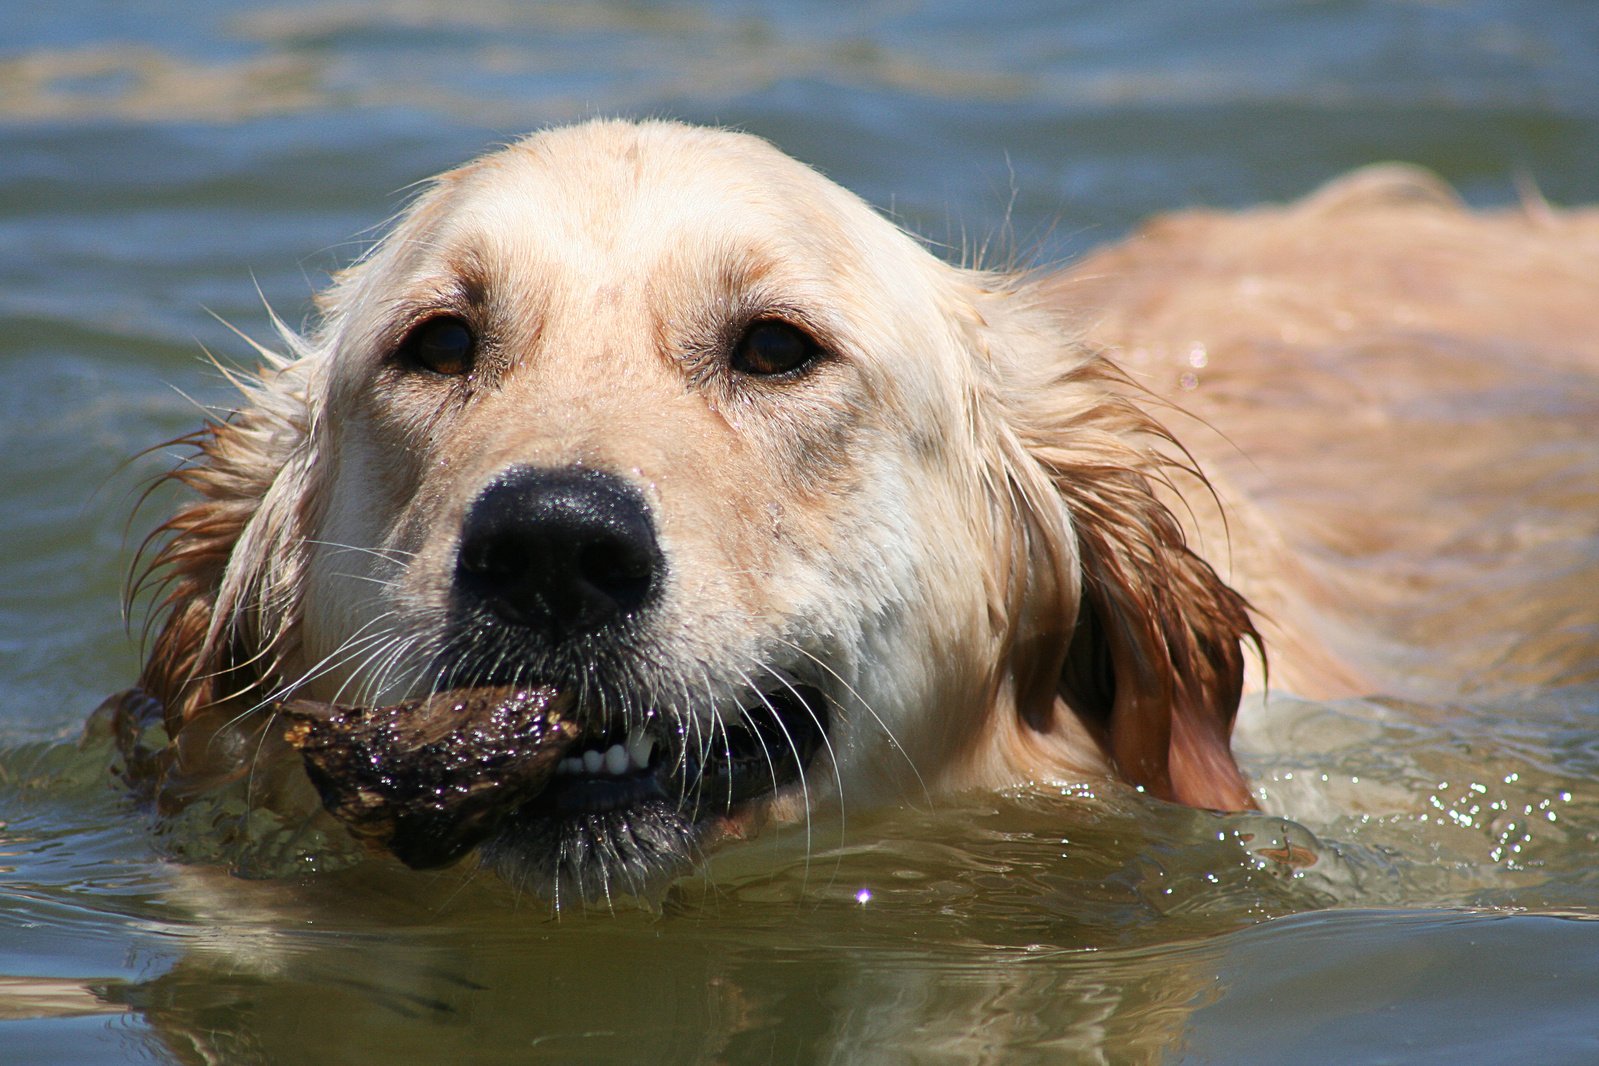 a close up of a dog in the water with a fish in its mouth